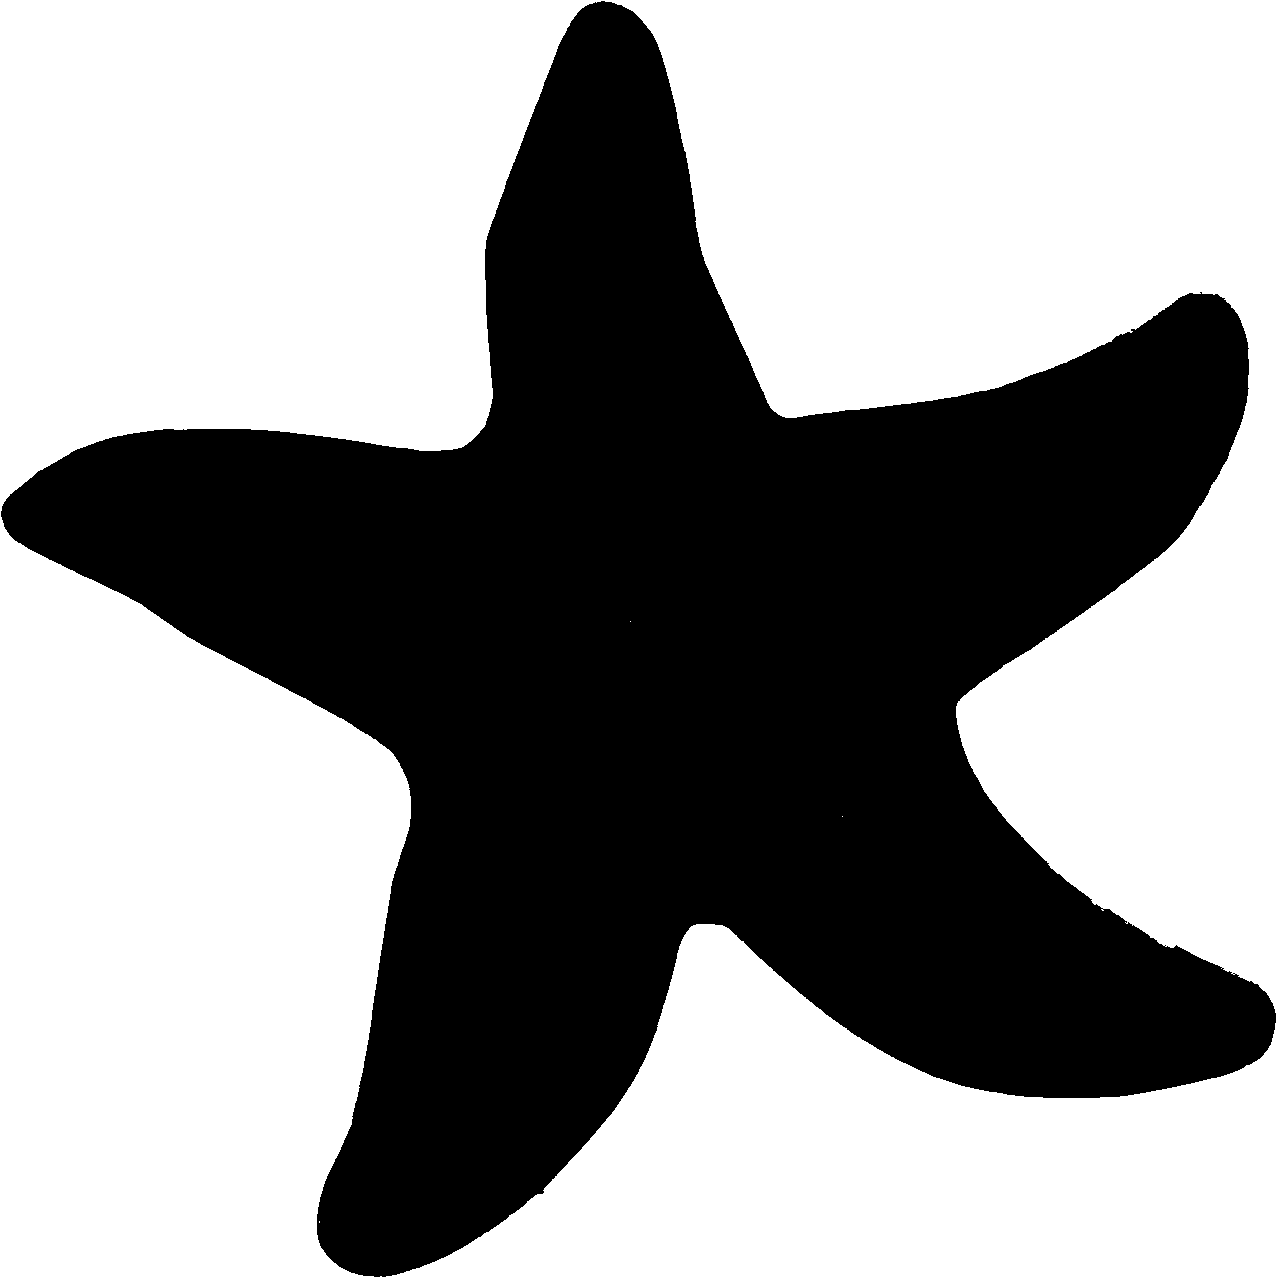 Starfish Silhouette Clip art - sea star png download - 512*512 - Free ...